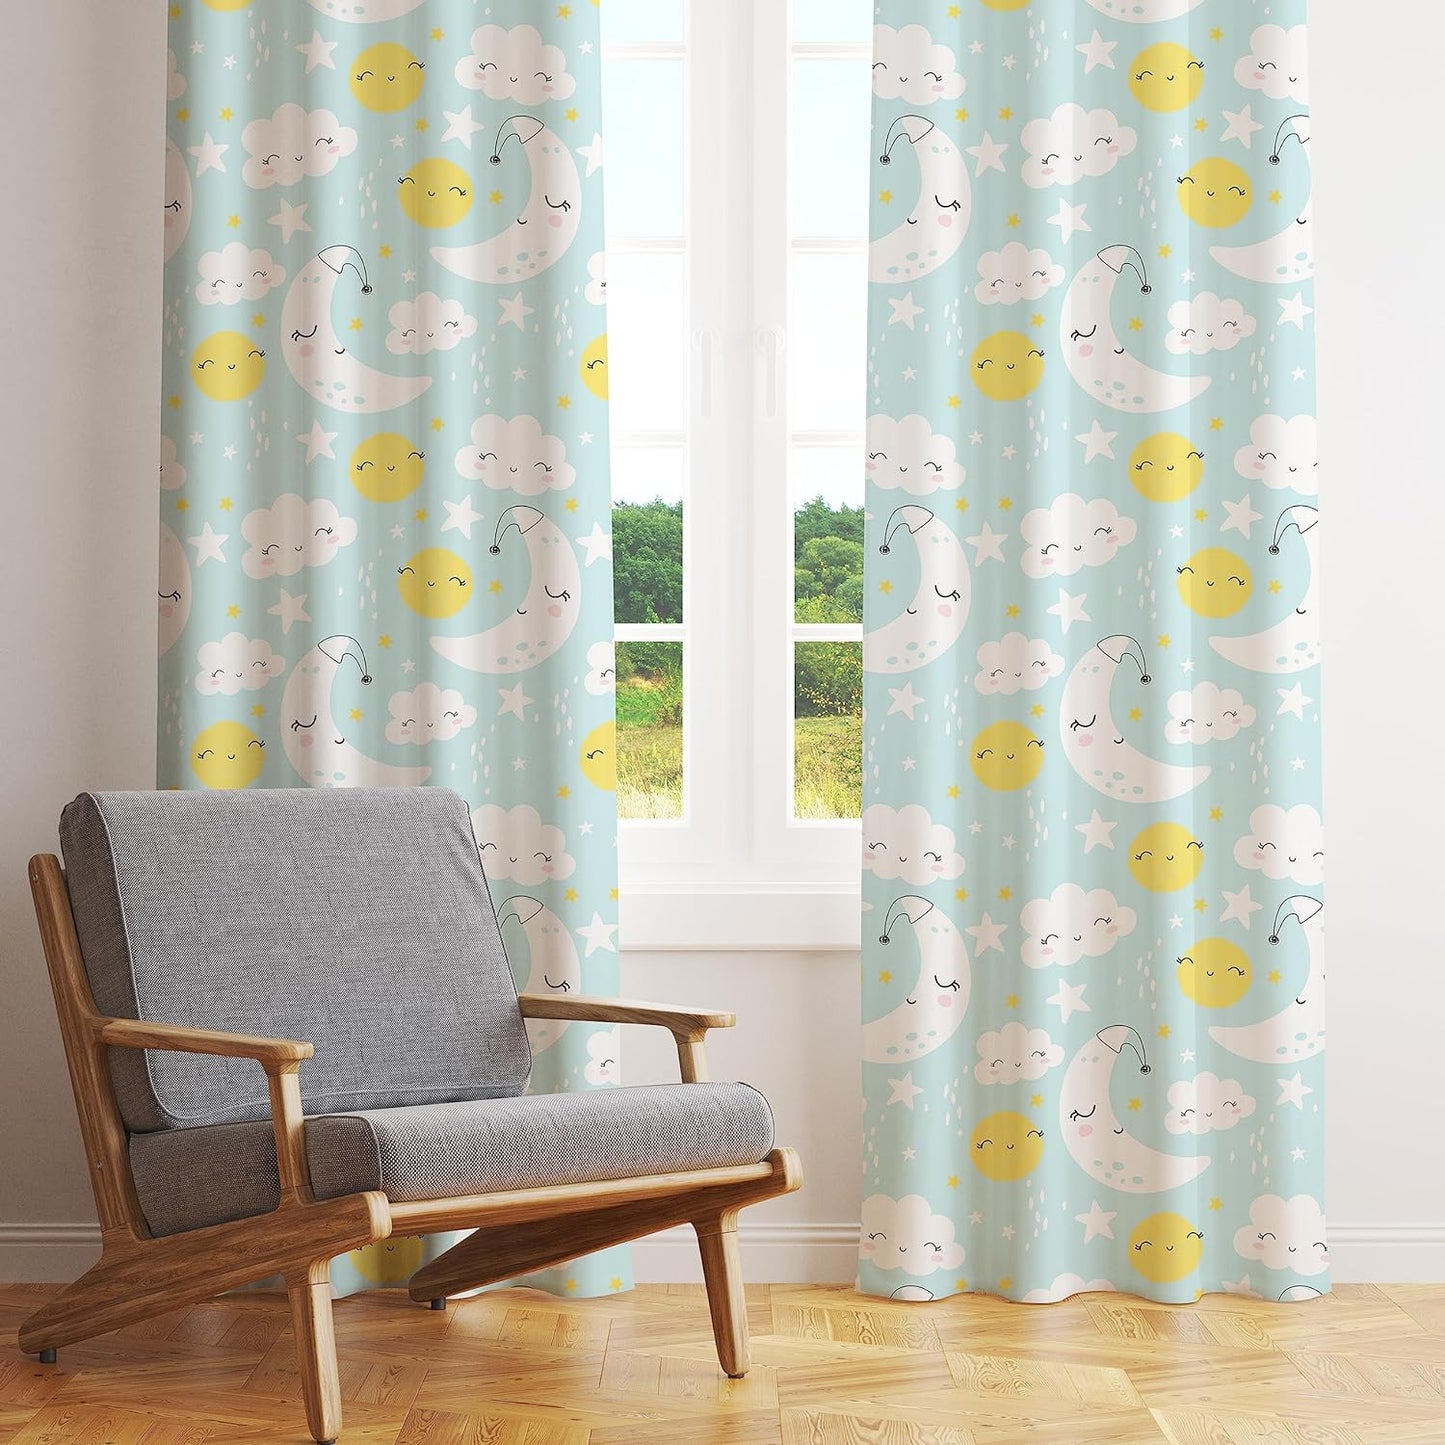 Whimsical curtain adorned with sun, moon, and cloud drawings in blue and yellow.